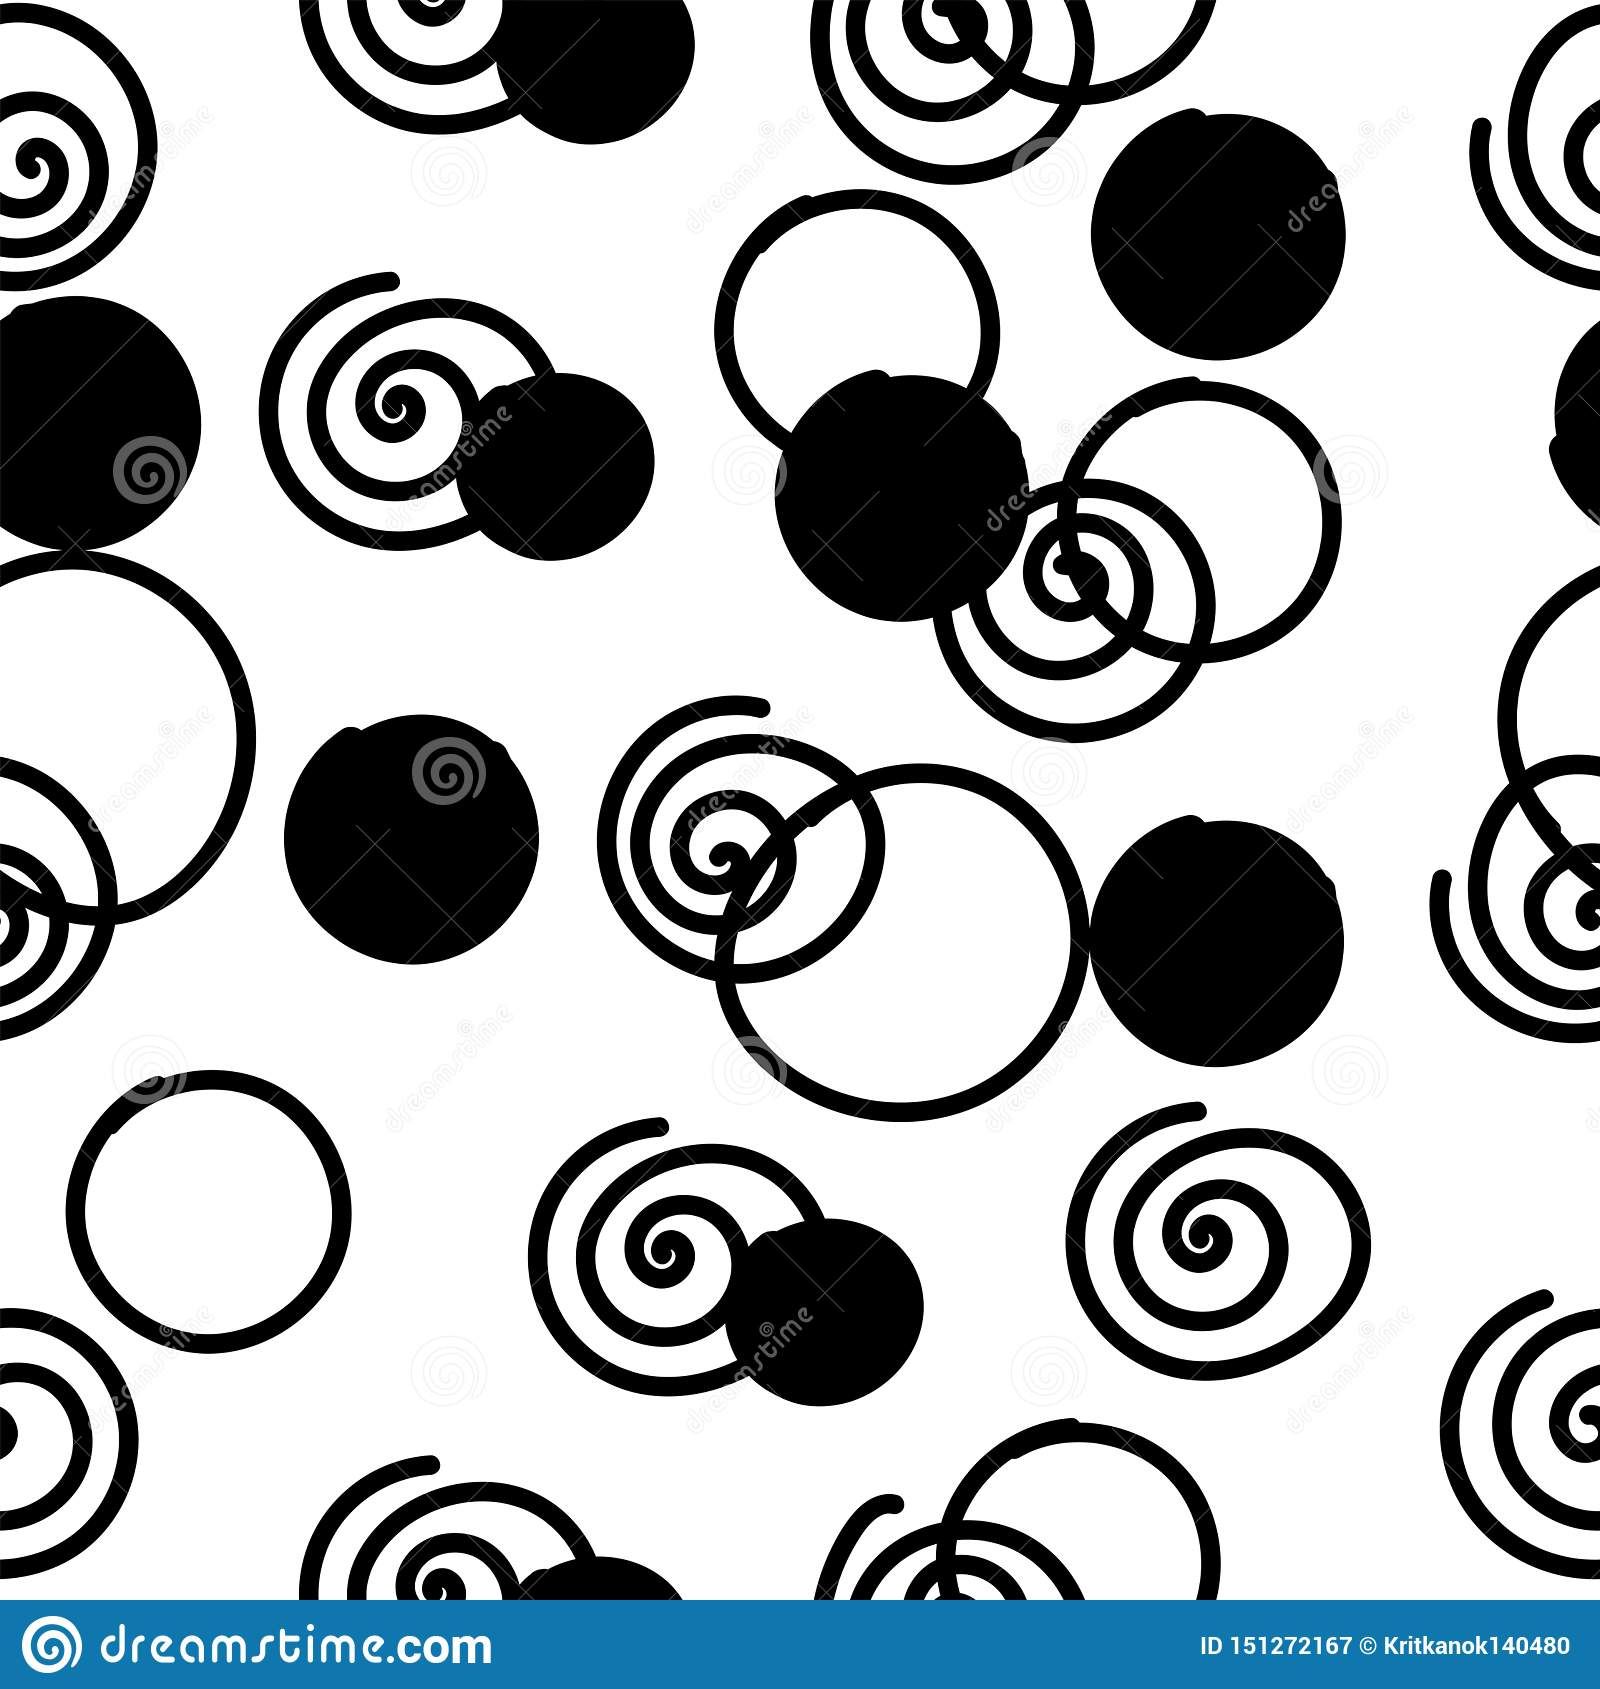 Spiral And Circle Seamless Pattern, Abstrack Doodle Wall Art Stock Vector –  Illustration Of Icon, Object: 151272167 Throughout Spiral Circles Wall Art (View 15 of 15)